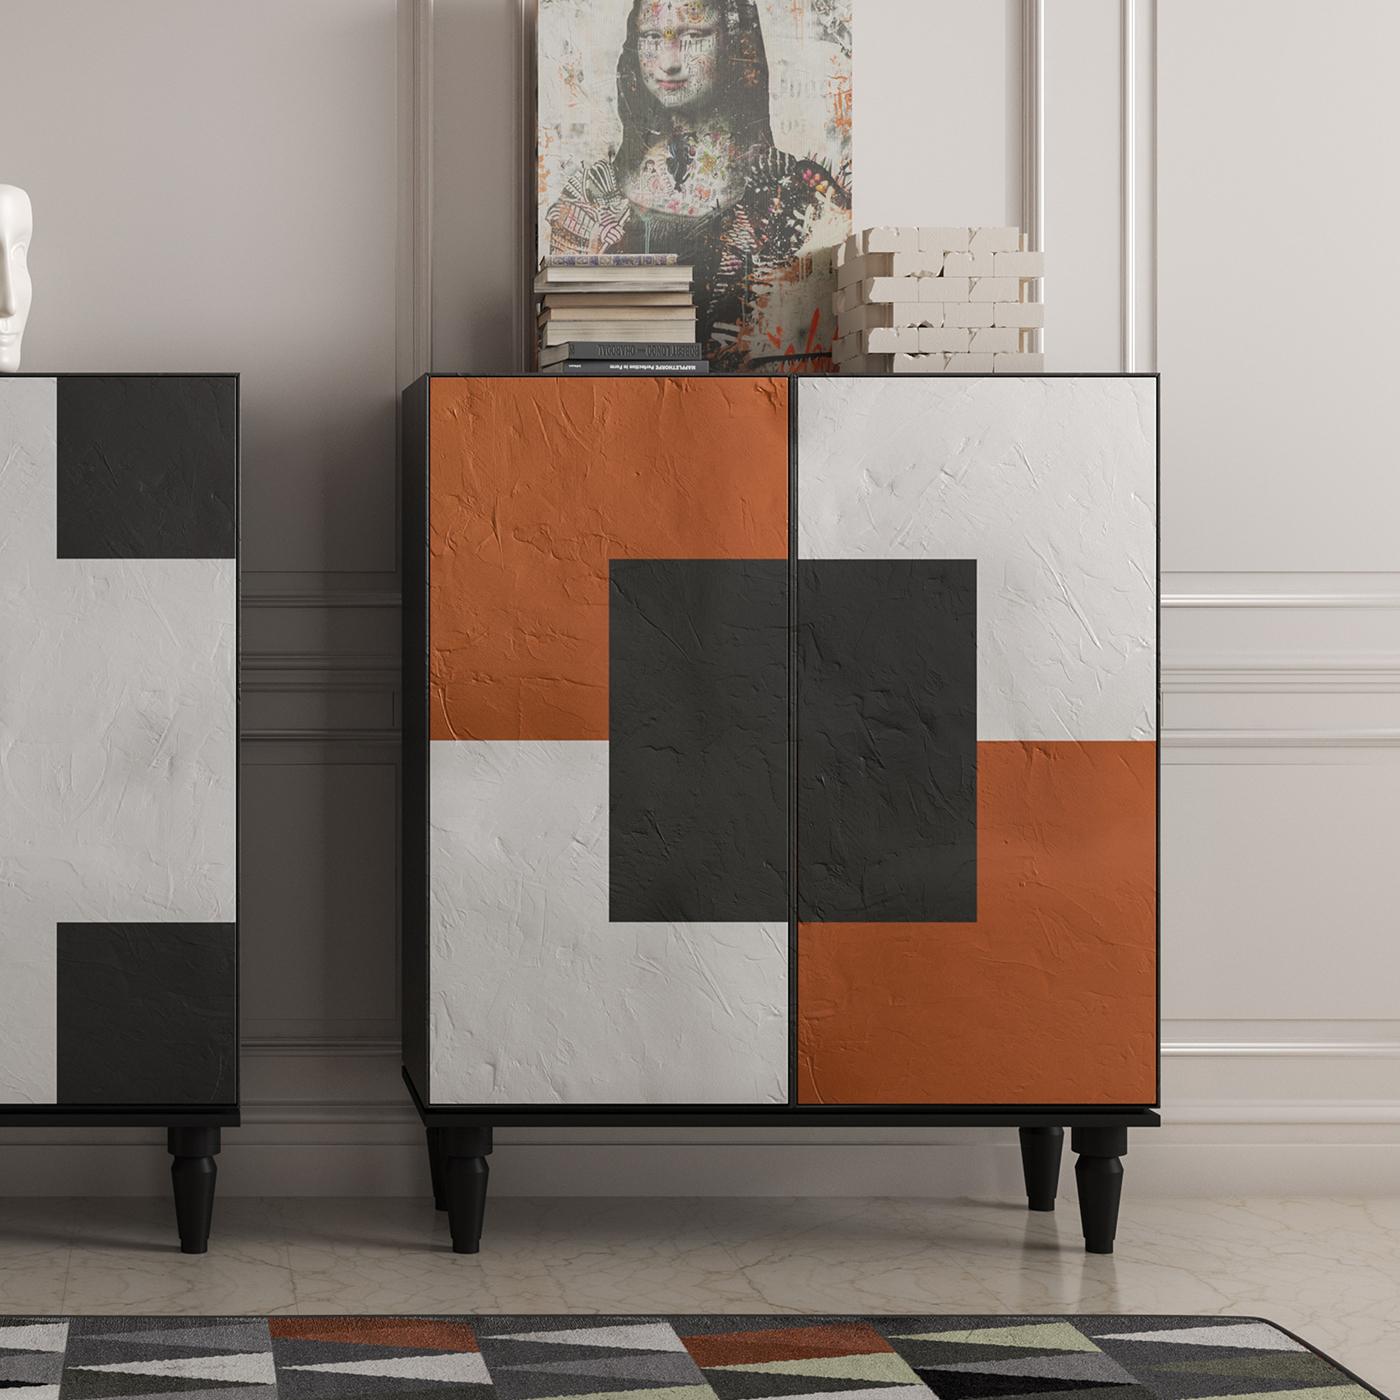 This superb cabinet is part of a series of modular pieces that distinguish a modern space, adding a unique dash of color and versatile storage space. Entirely made of MDF, this piece boasts a matte lacquered finish that combines black, white, and